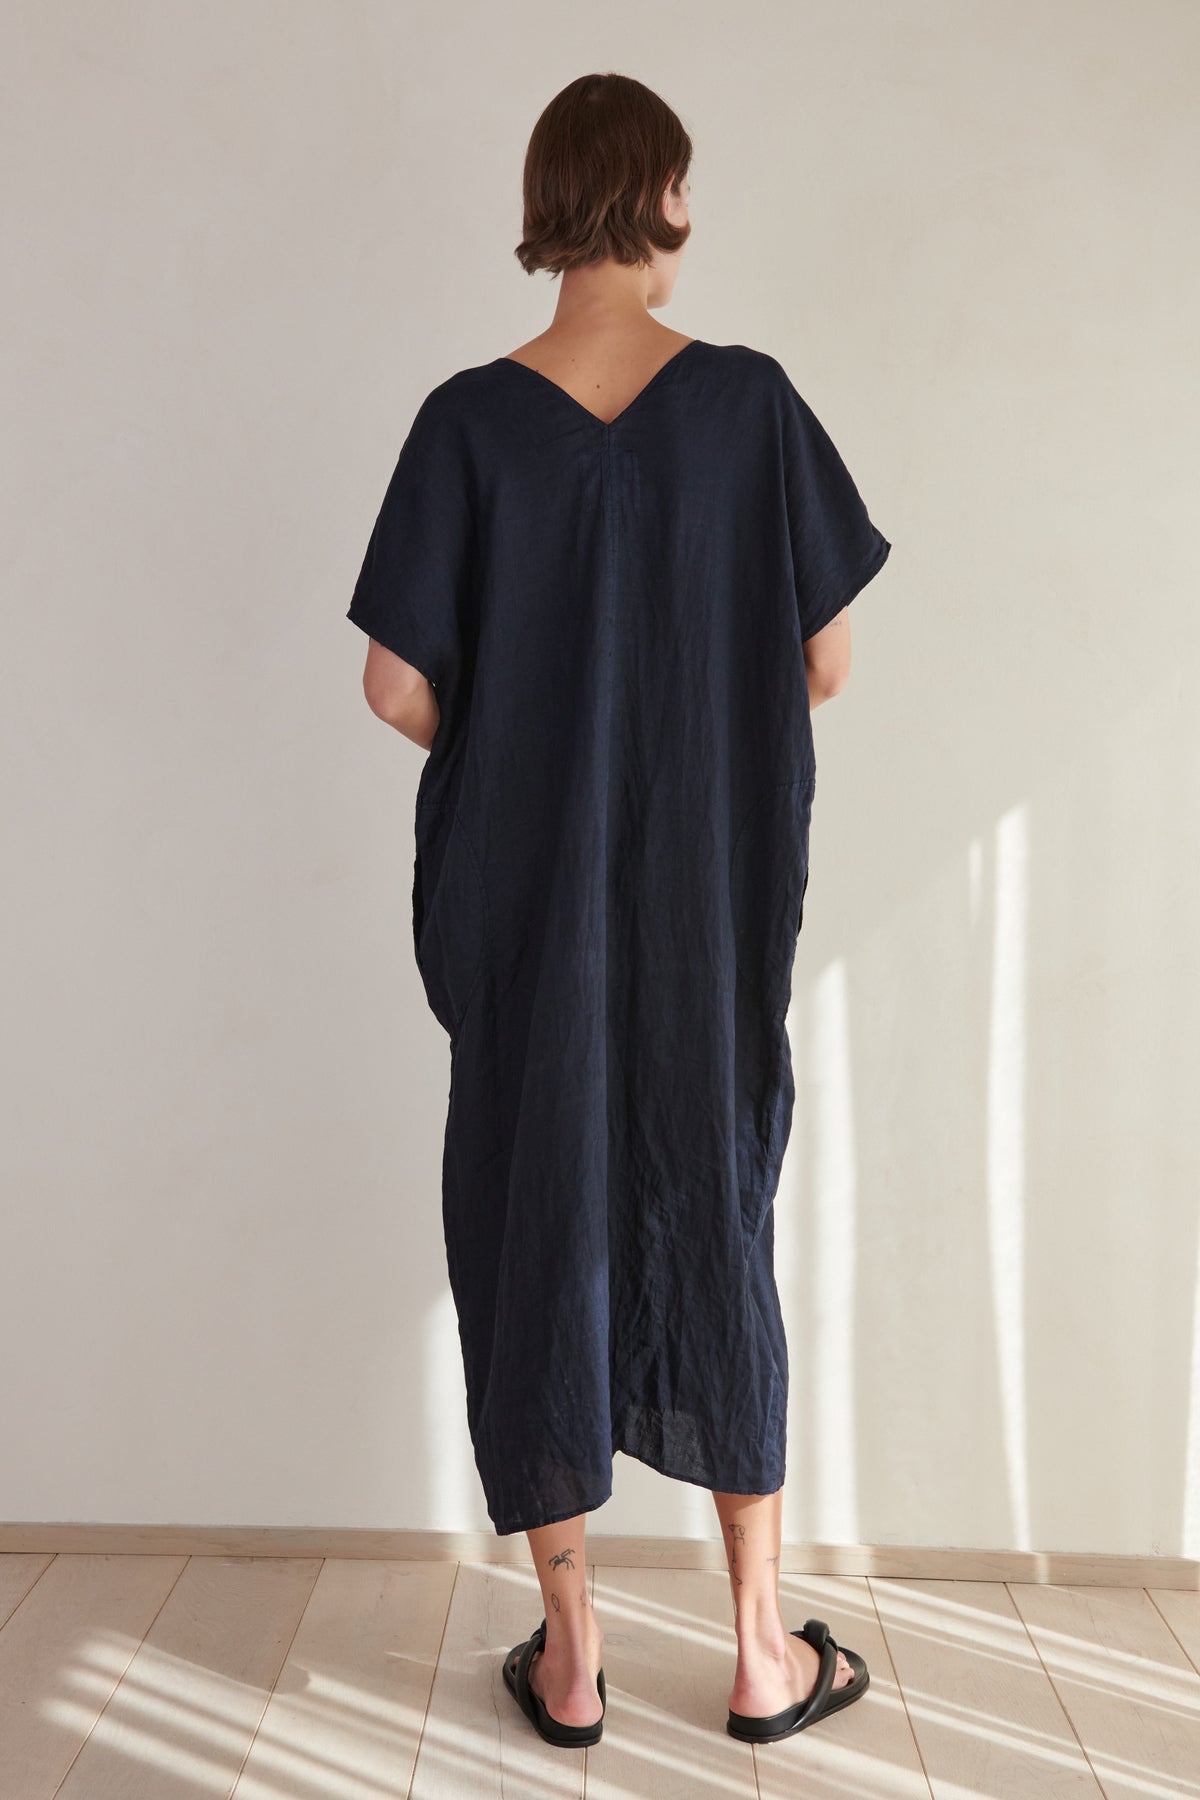 A woman in a Velvet by Jenny Graham Montana Linen Dress stands facing away from the camera, highlighting a loose fit and simple design, in a well-lit room with a neutral background.-26293194686657